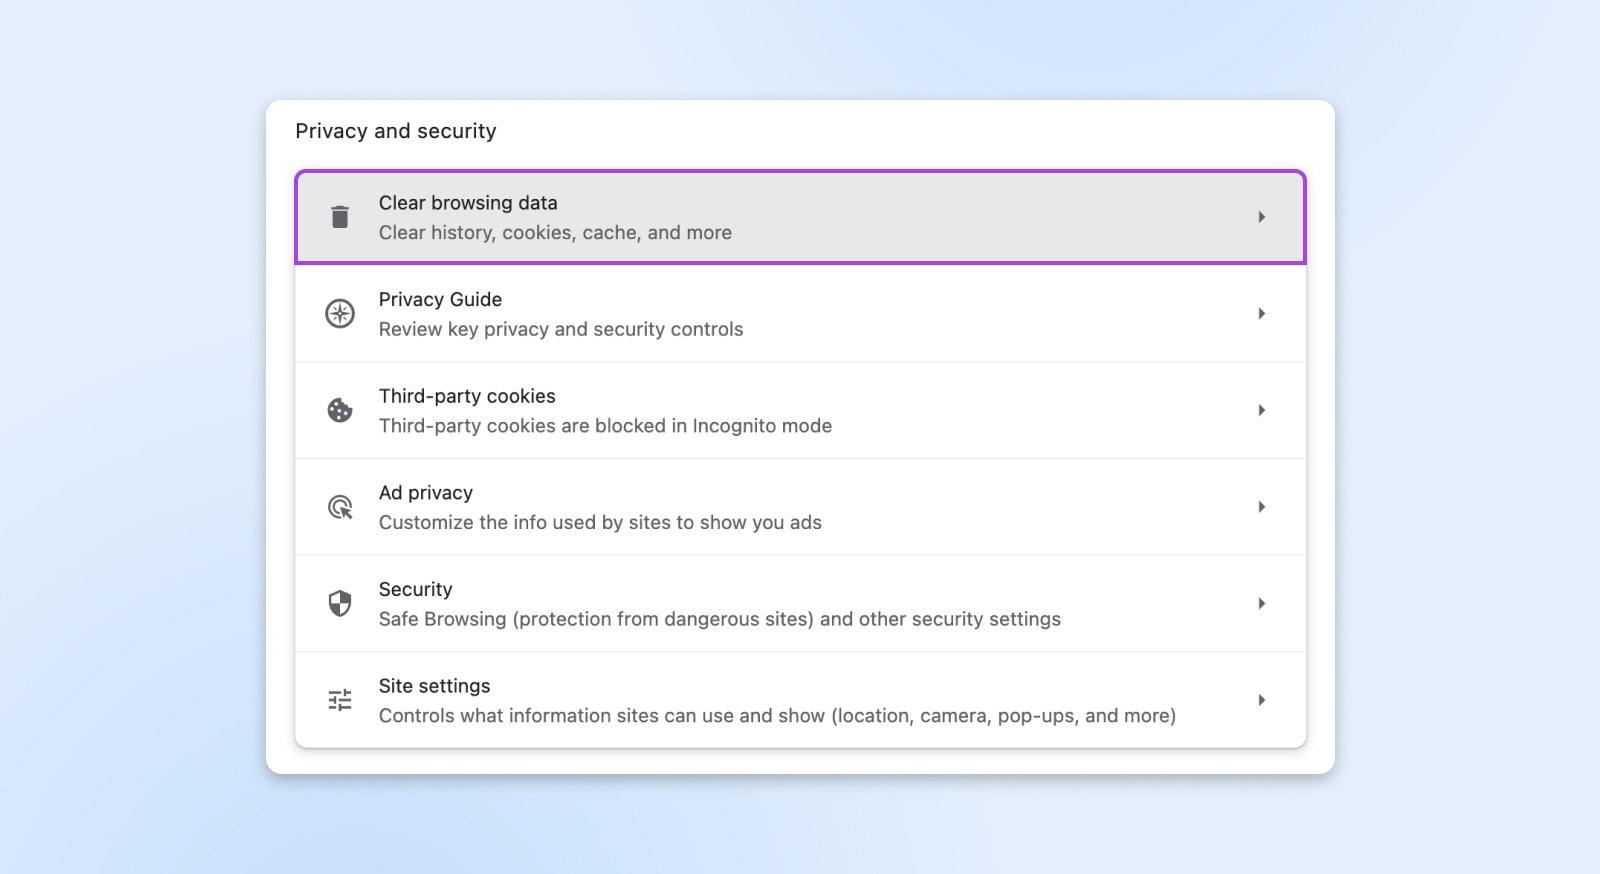 close up of the privacy and security settings box we saw before, but this time with "Clear browsing data" highlighted